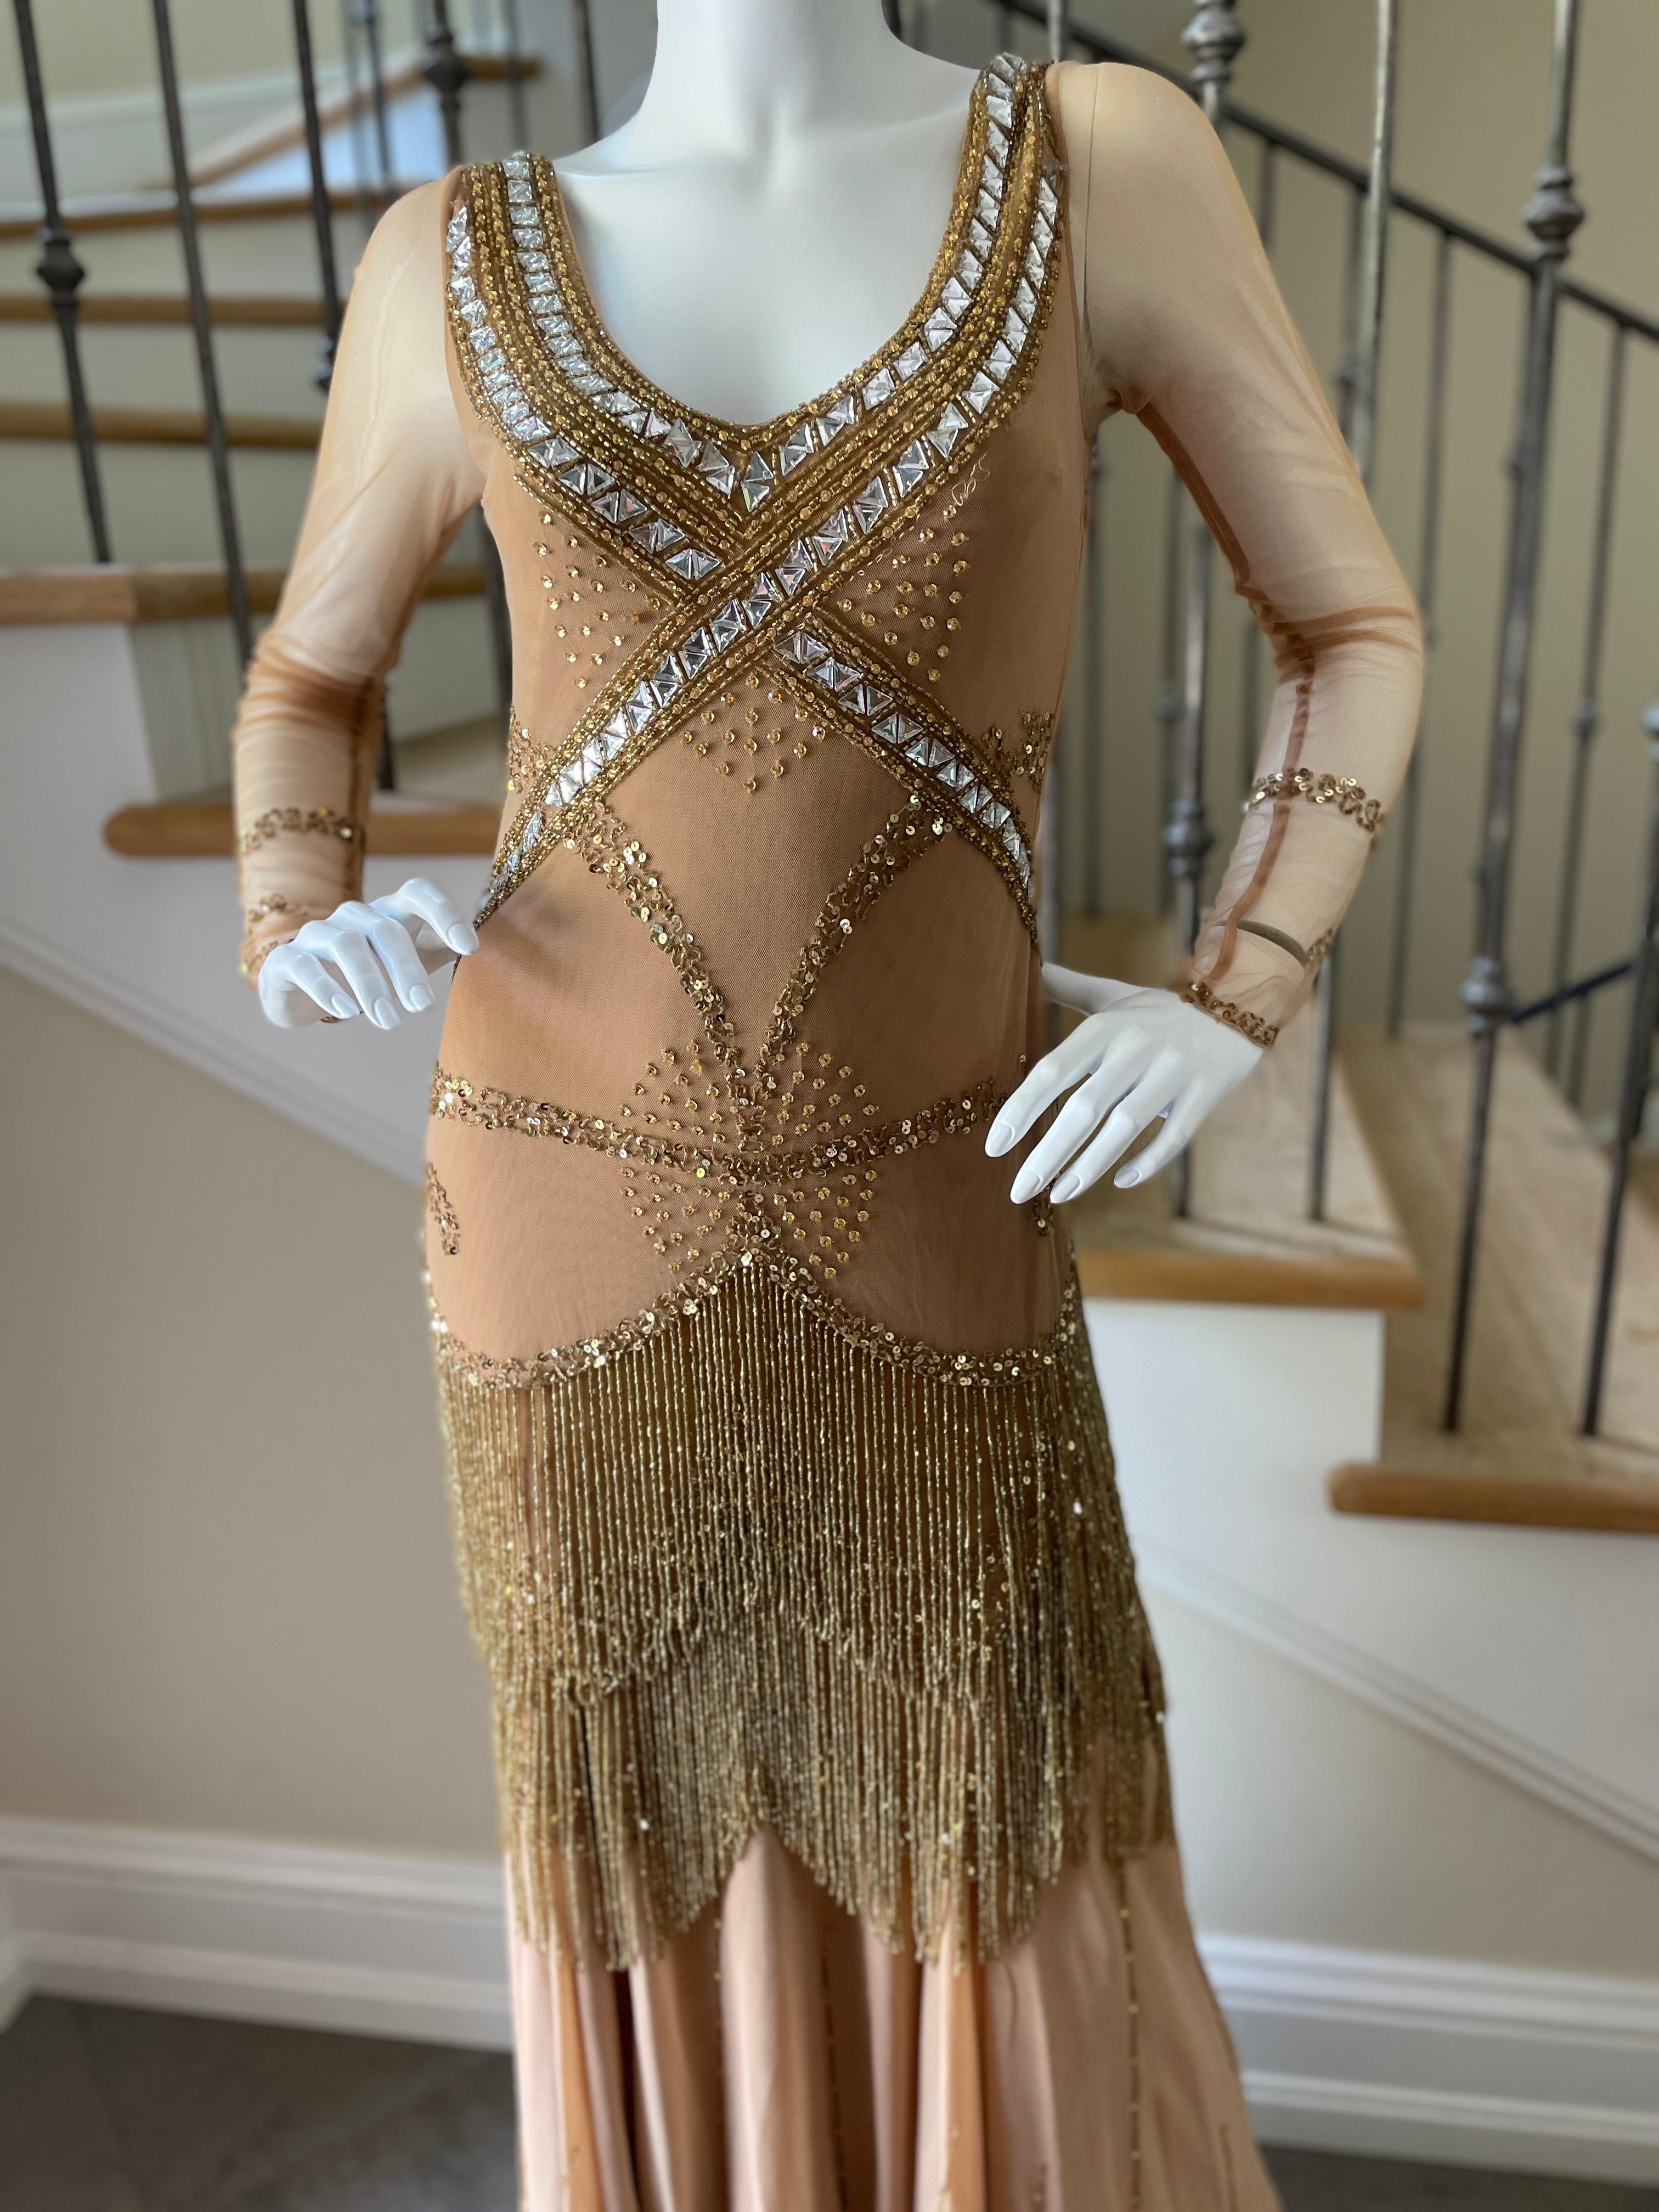 Brown Class Cavalli Extravagantly Jeweled Vintage Evening Dress with Beaded Fringe For Sale